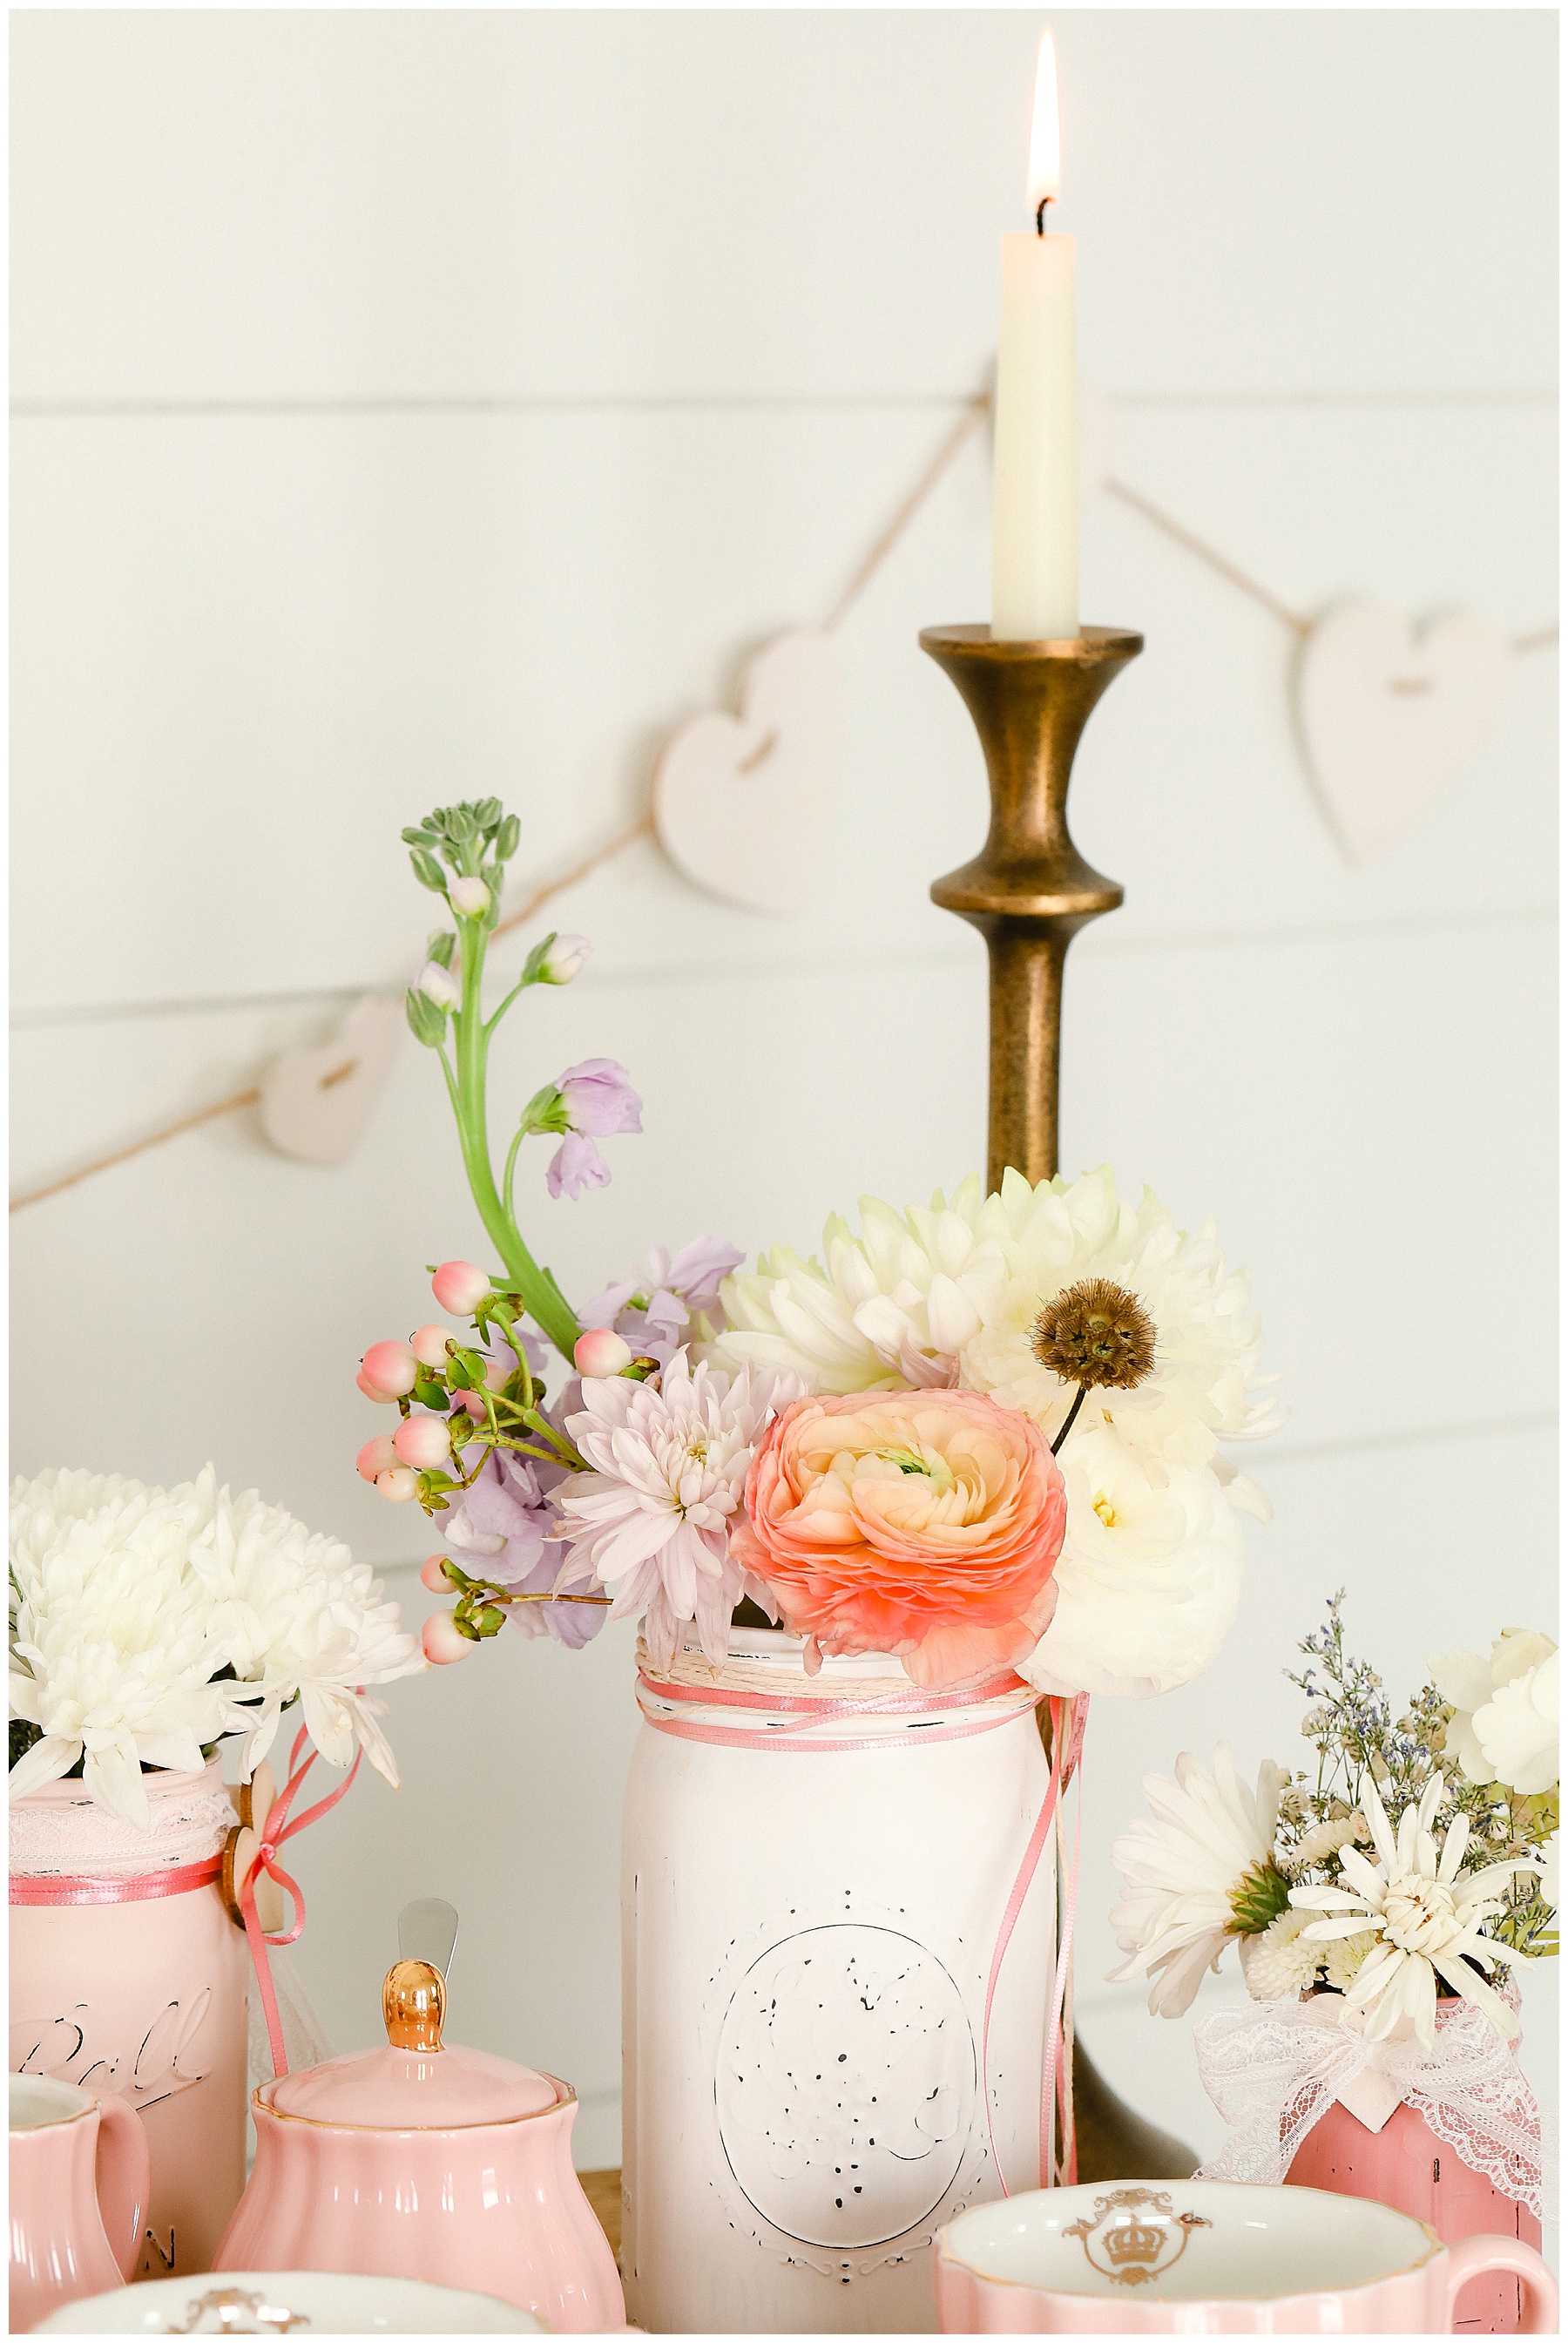 Valentine's Day table decoration ideas